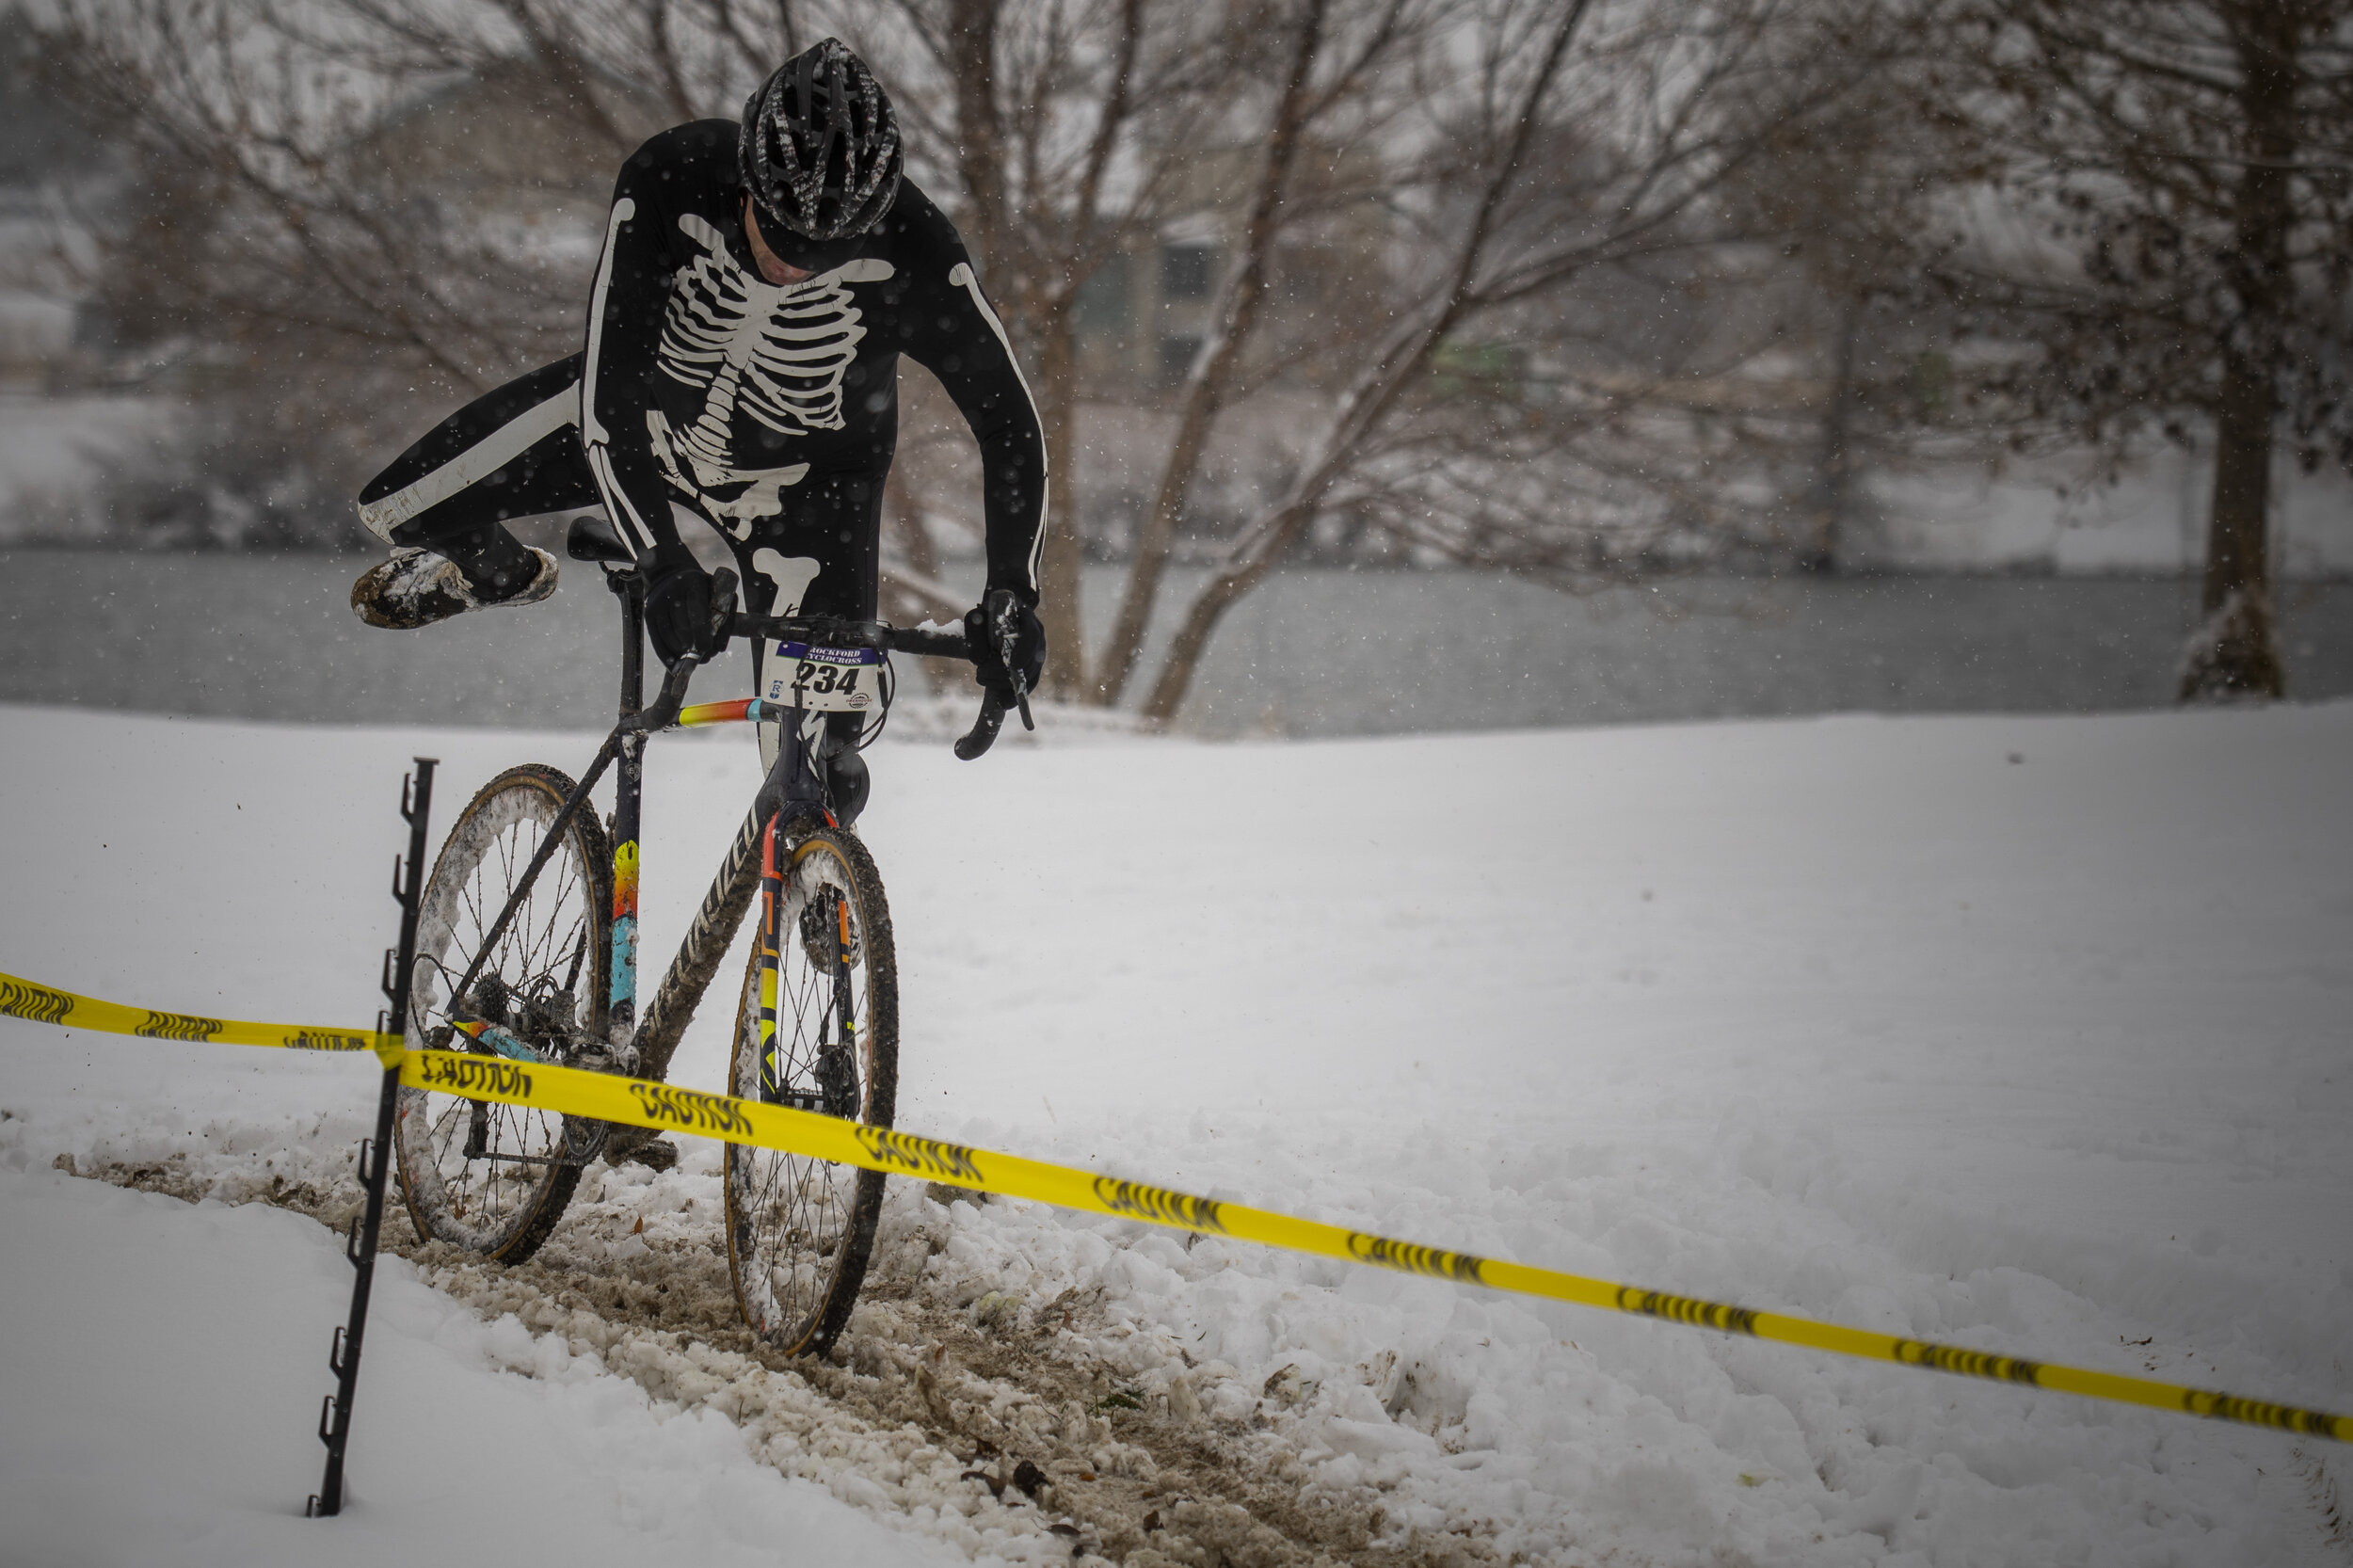  This year’s Mulecross cyclocross race was a snowy and spooky endeavor. 